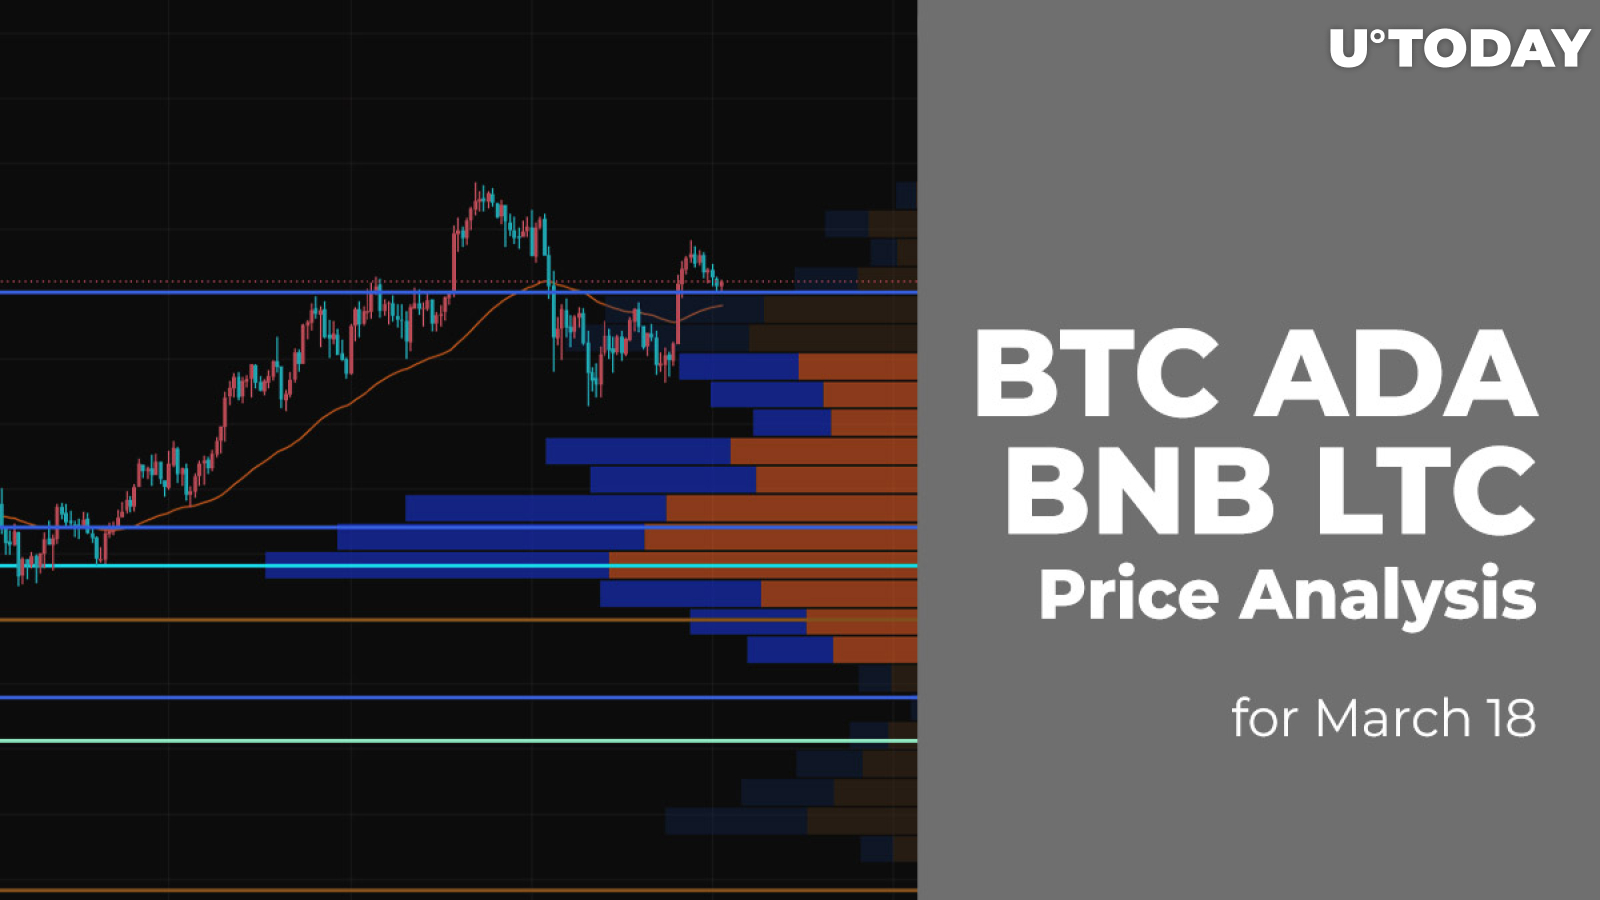 BTC, ADA, BNB and LTC Price Analysis for March 18